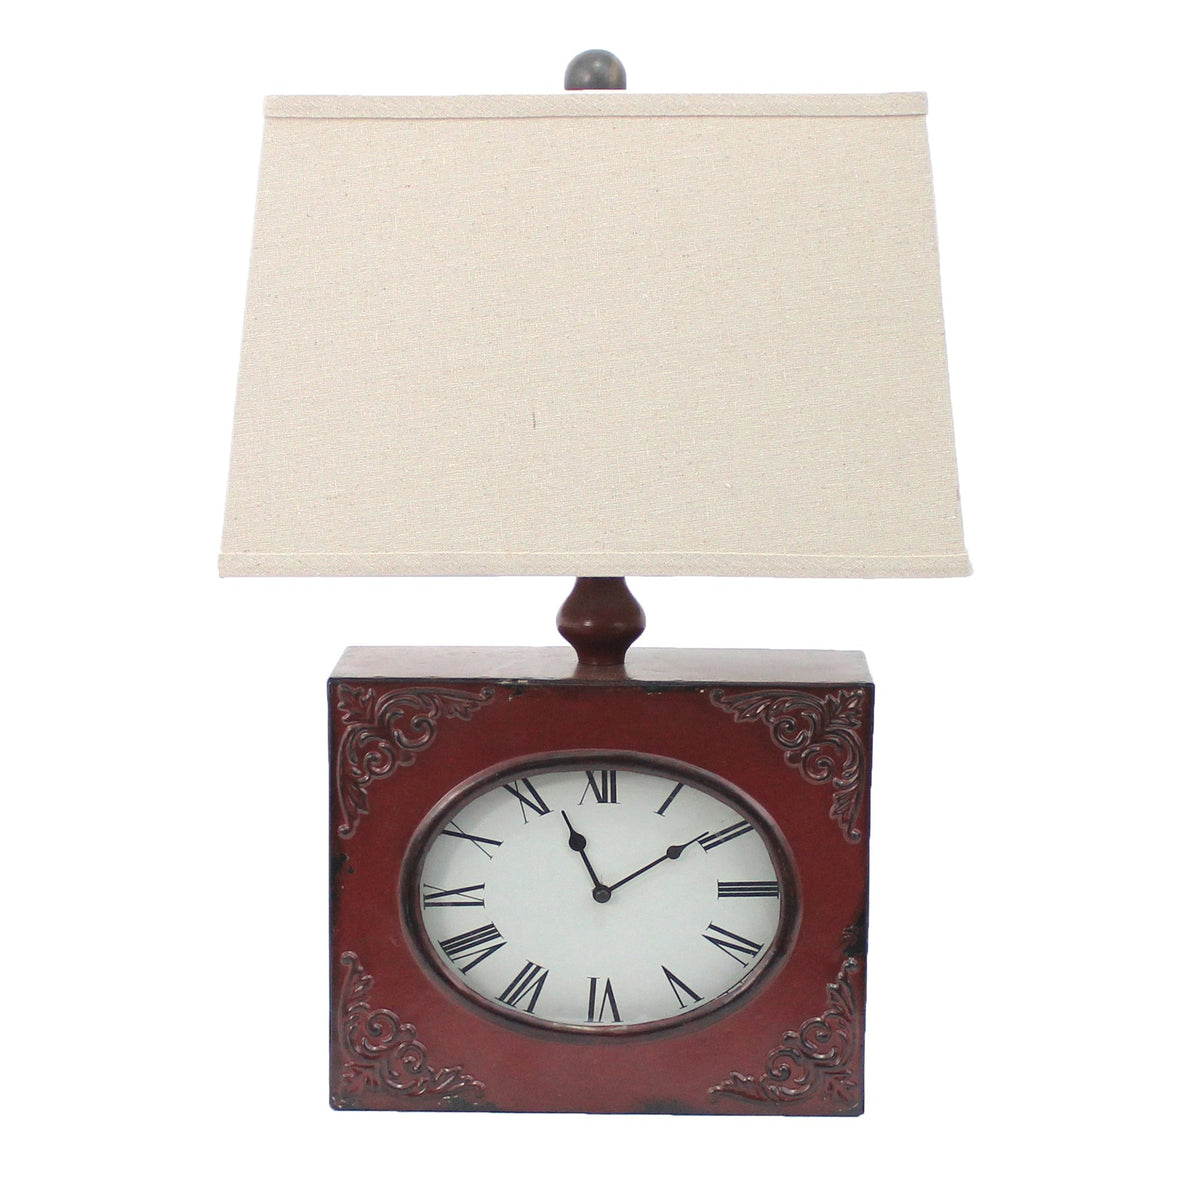 Clock Design Metal Table Lamp with Tapered Shade, Red and Beige - BM217249